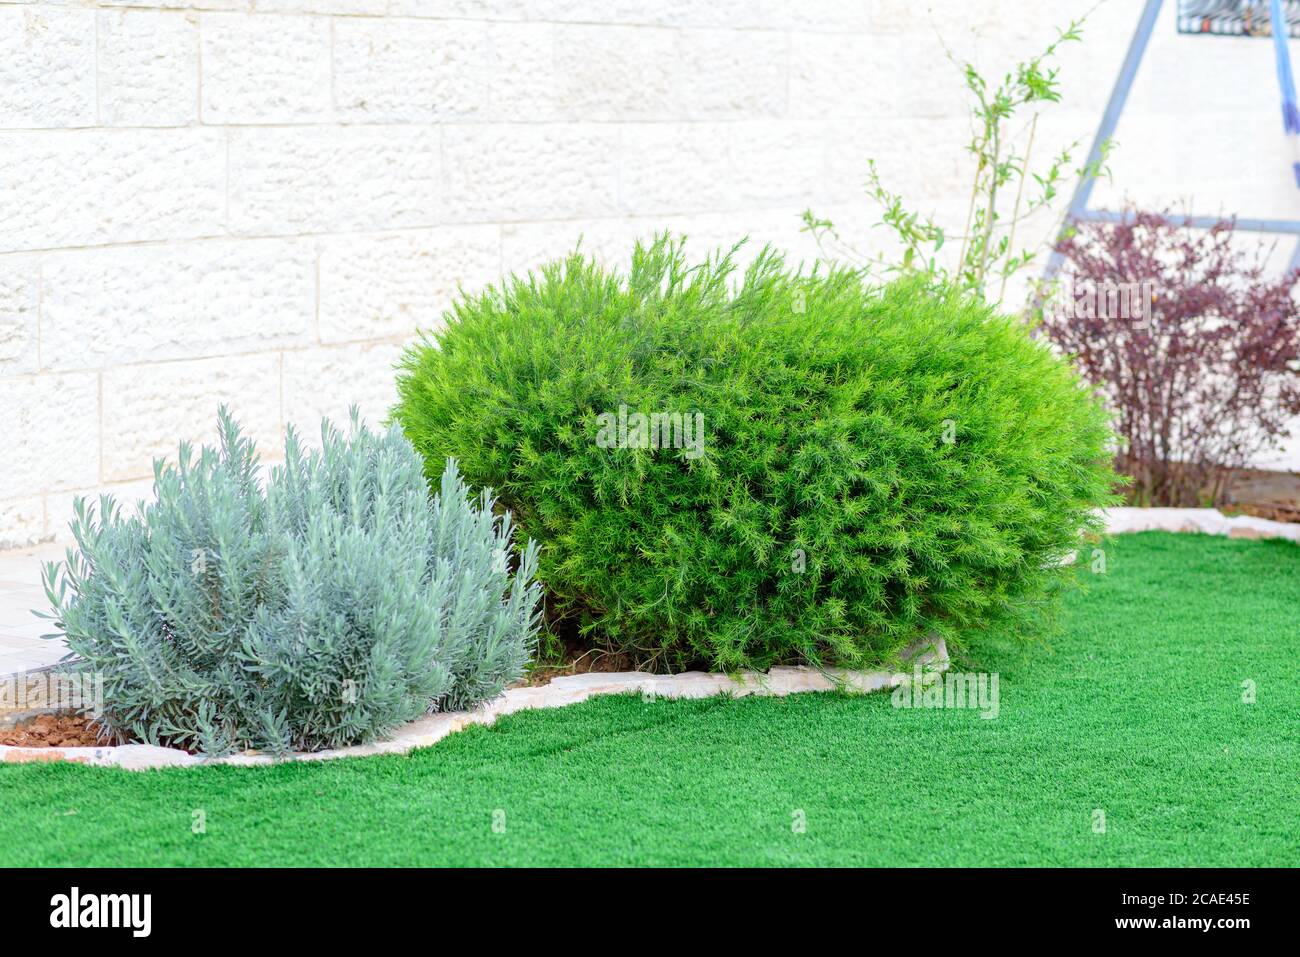 Landscaped Format, yard with garden design.Young green fresh bushes near the house, front yard. Landscape design. Stock Photo